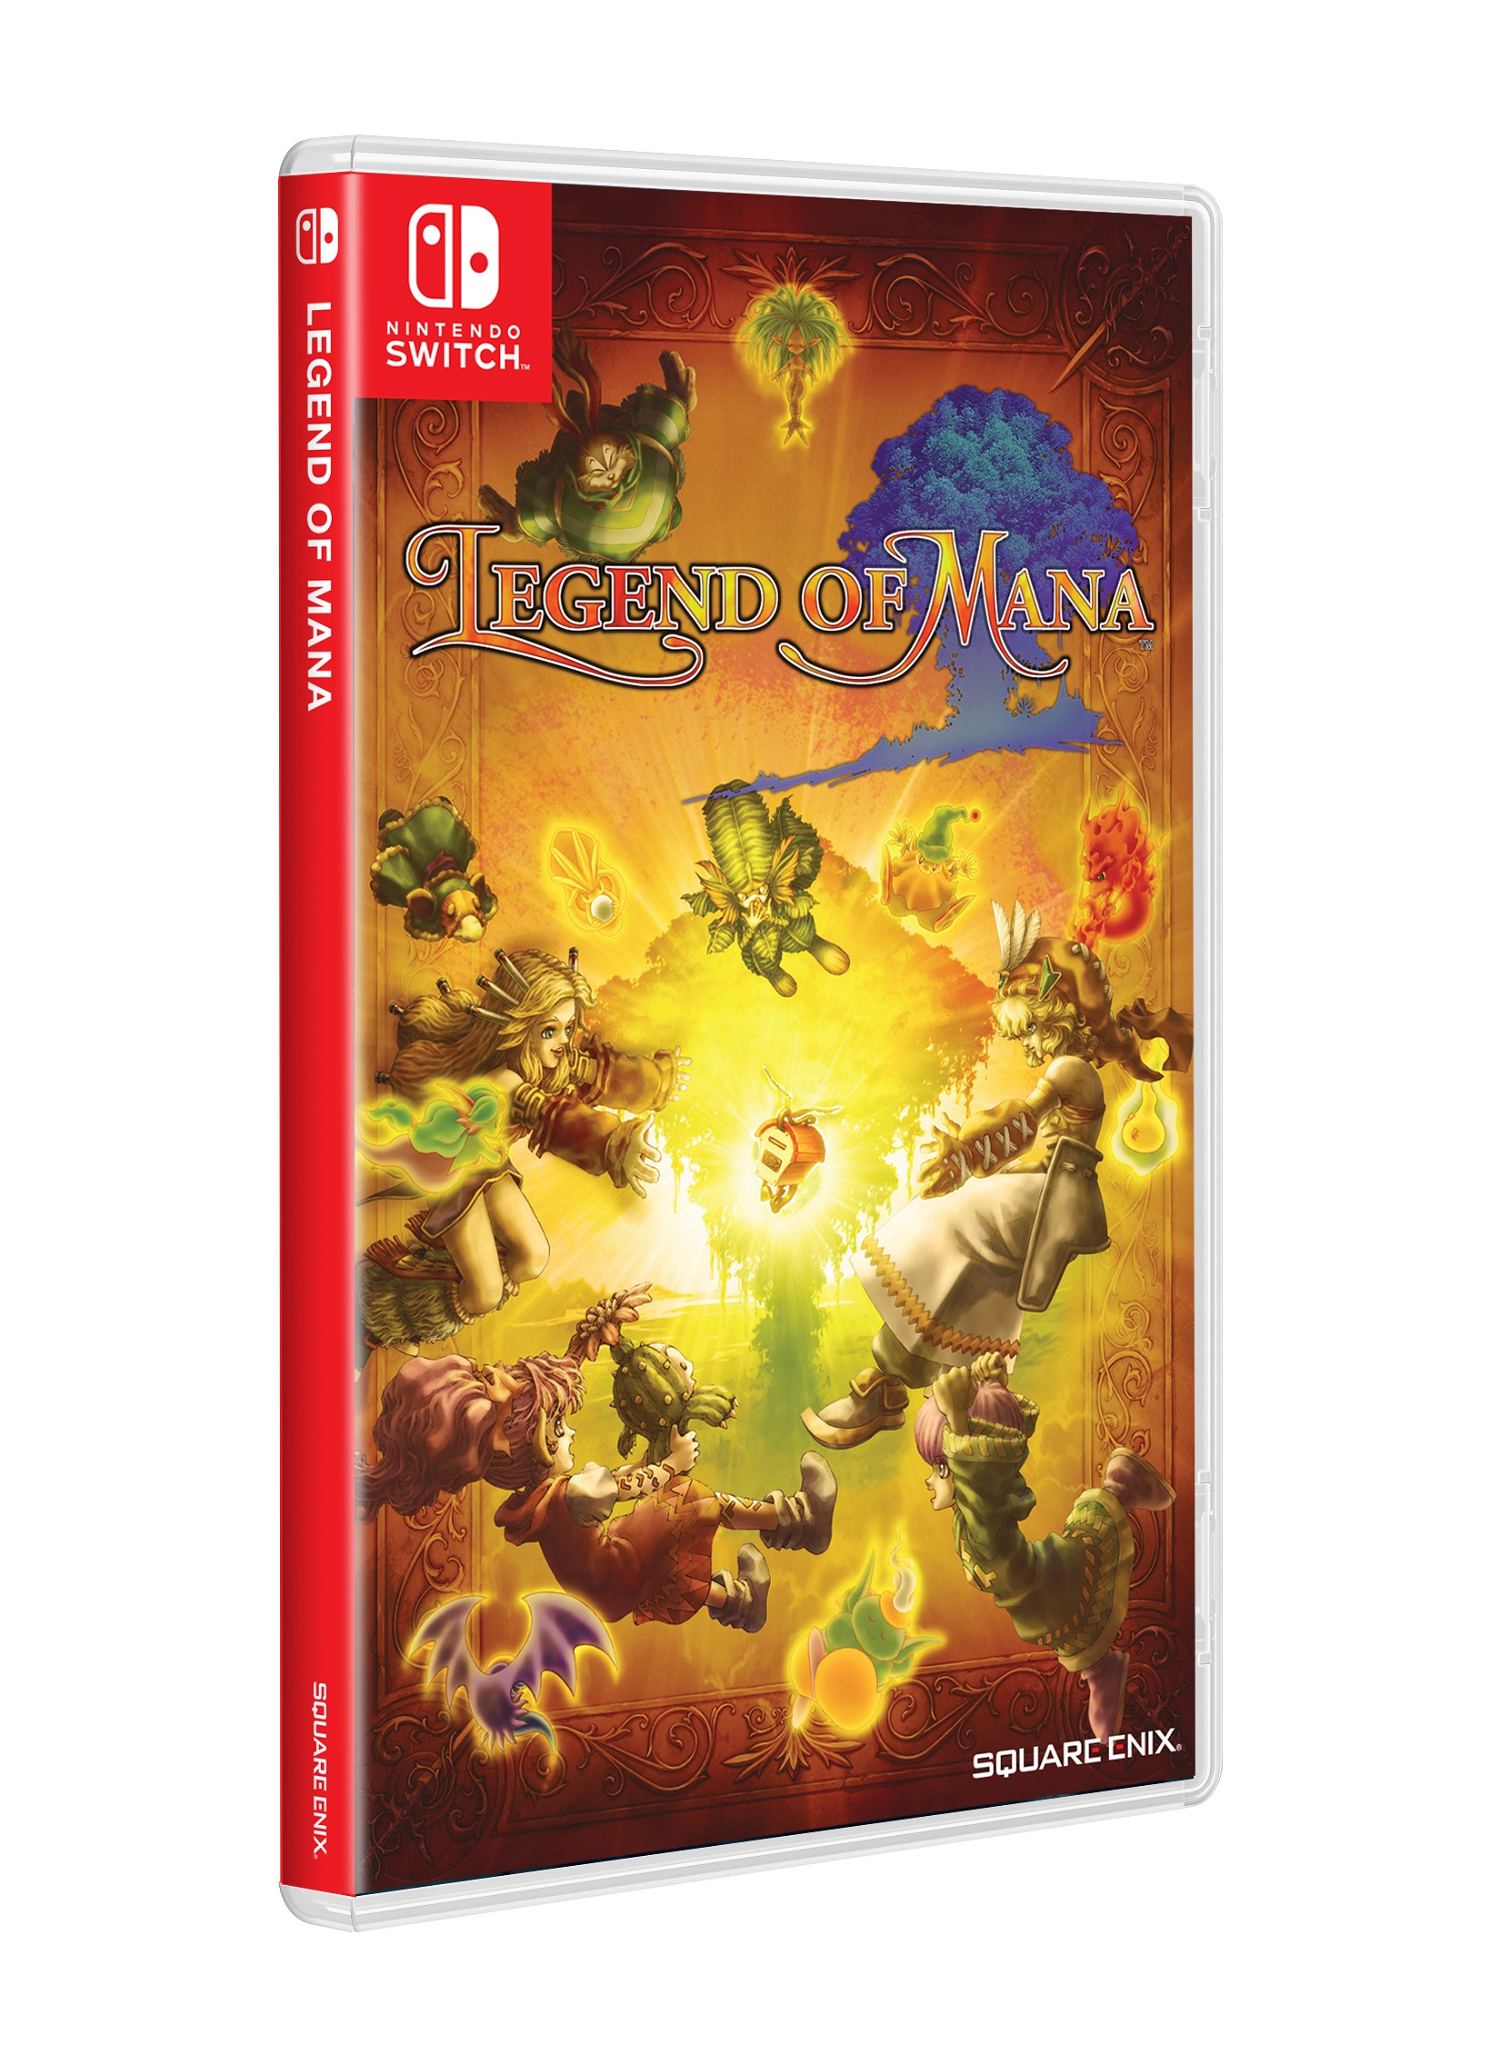 Buy Legend of Mana Remastered (English) for Nintendo Switch